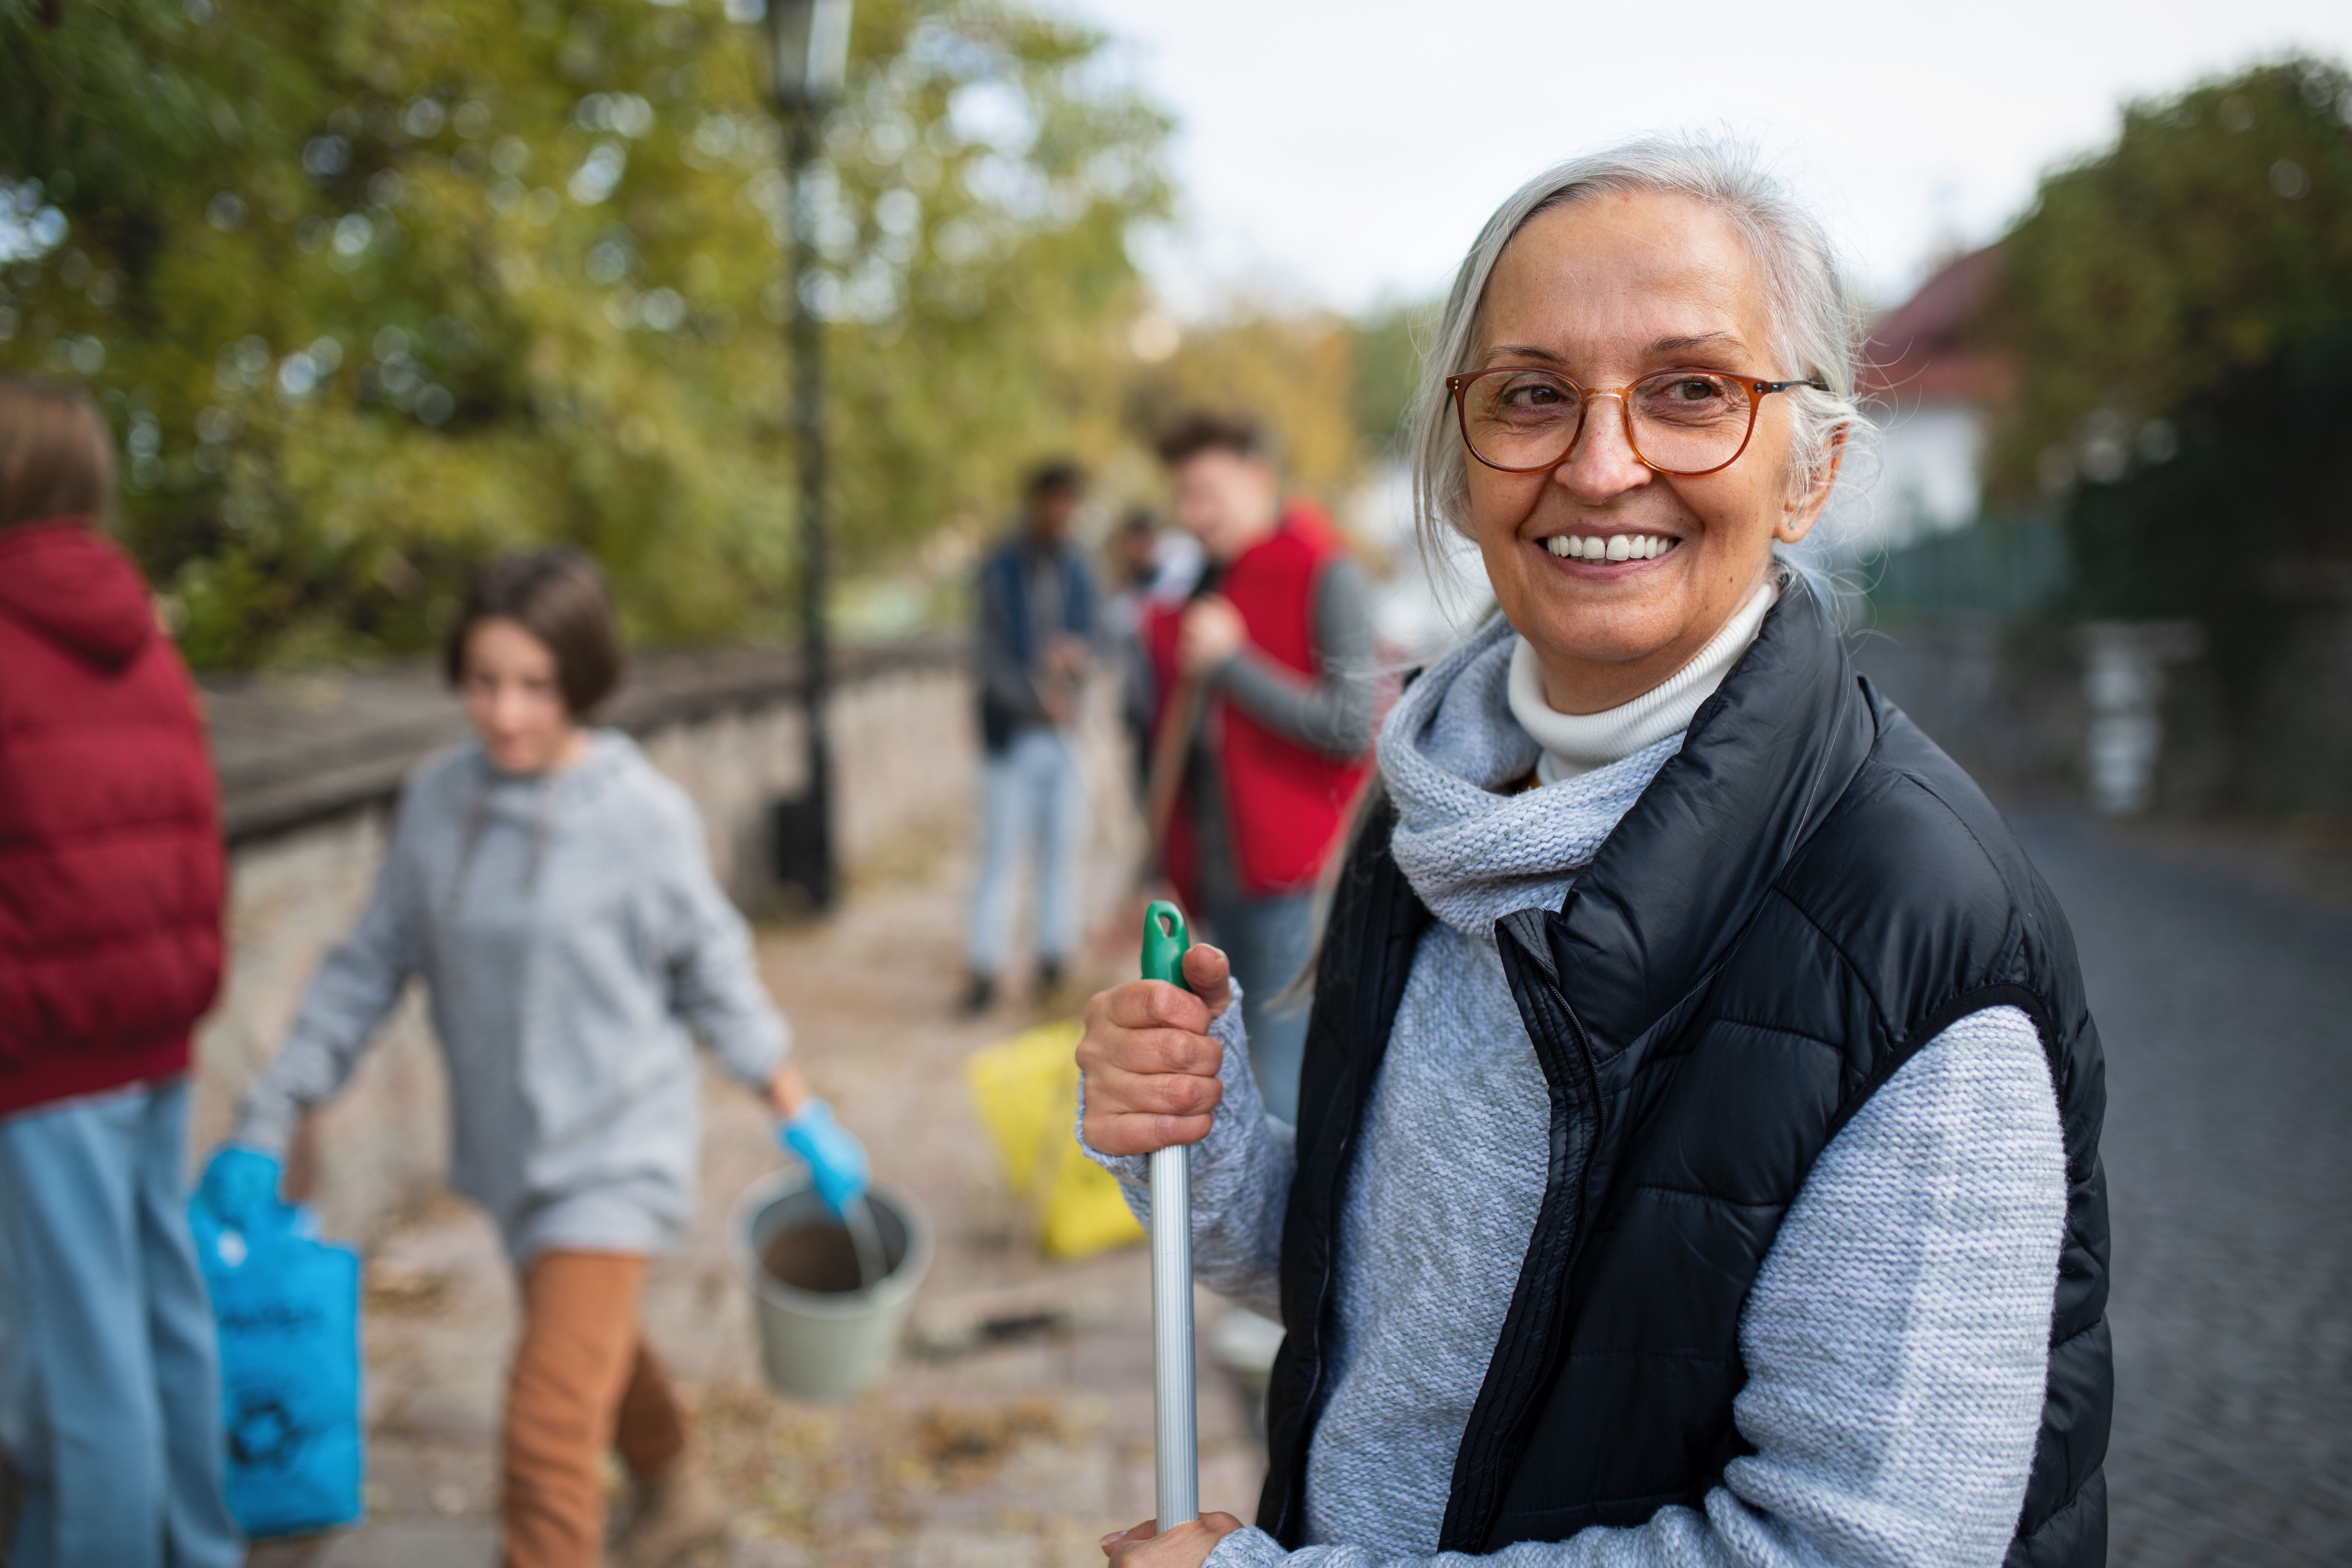 Woman with a group of community workers clearing leaves and litter picking